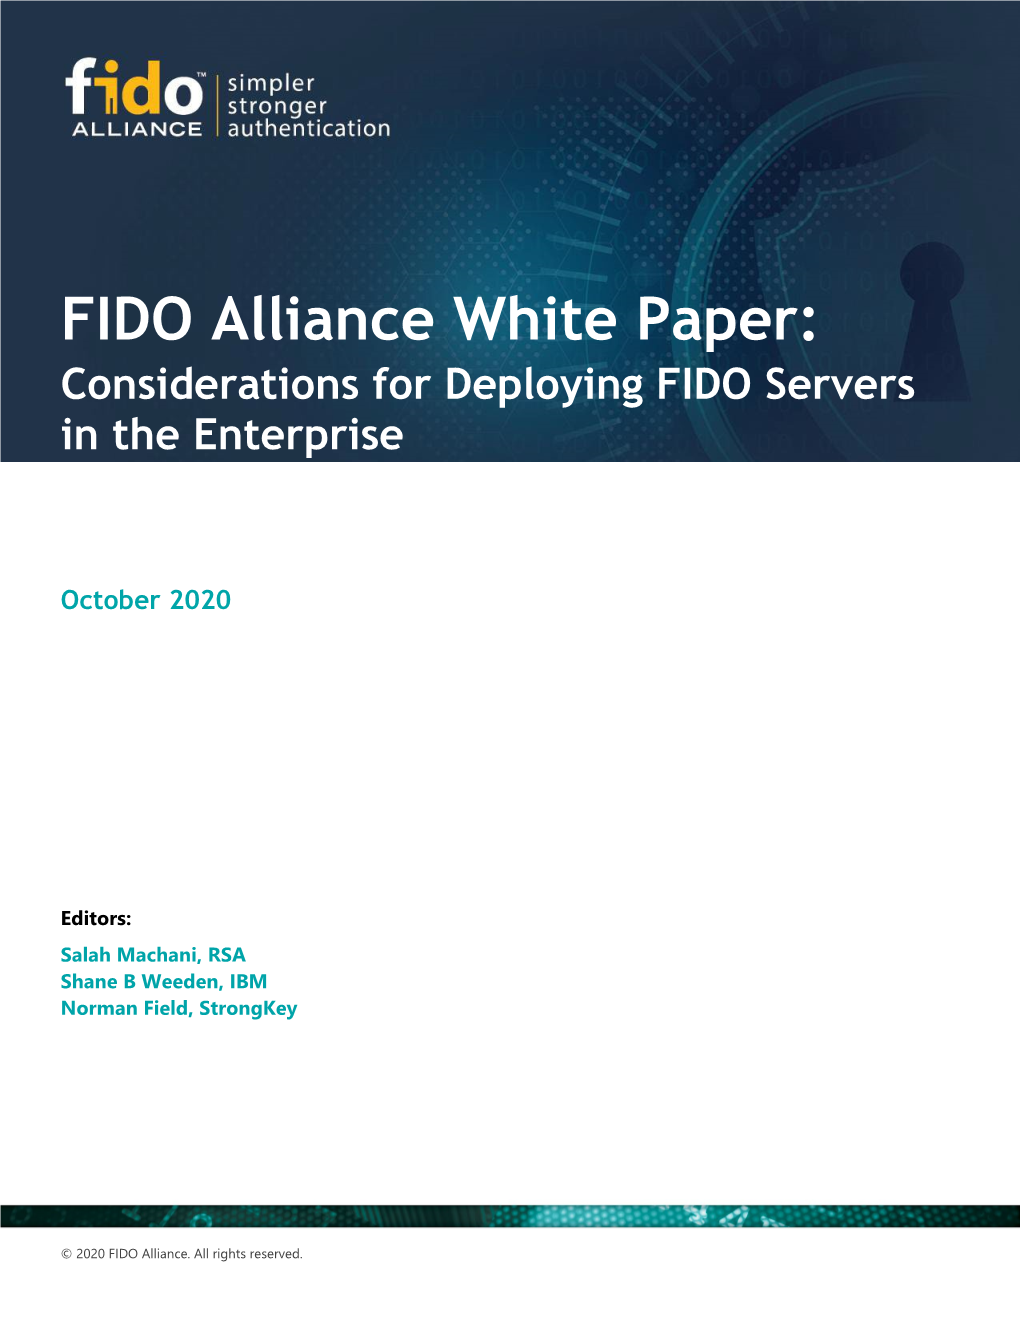 Considerations for Deploying FIDO Servers in the Enterprise